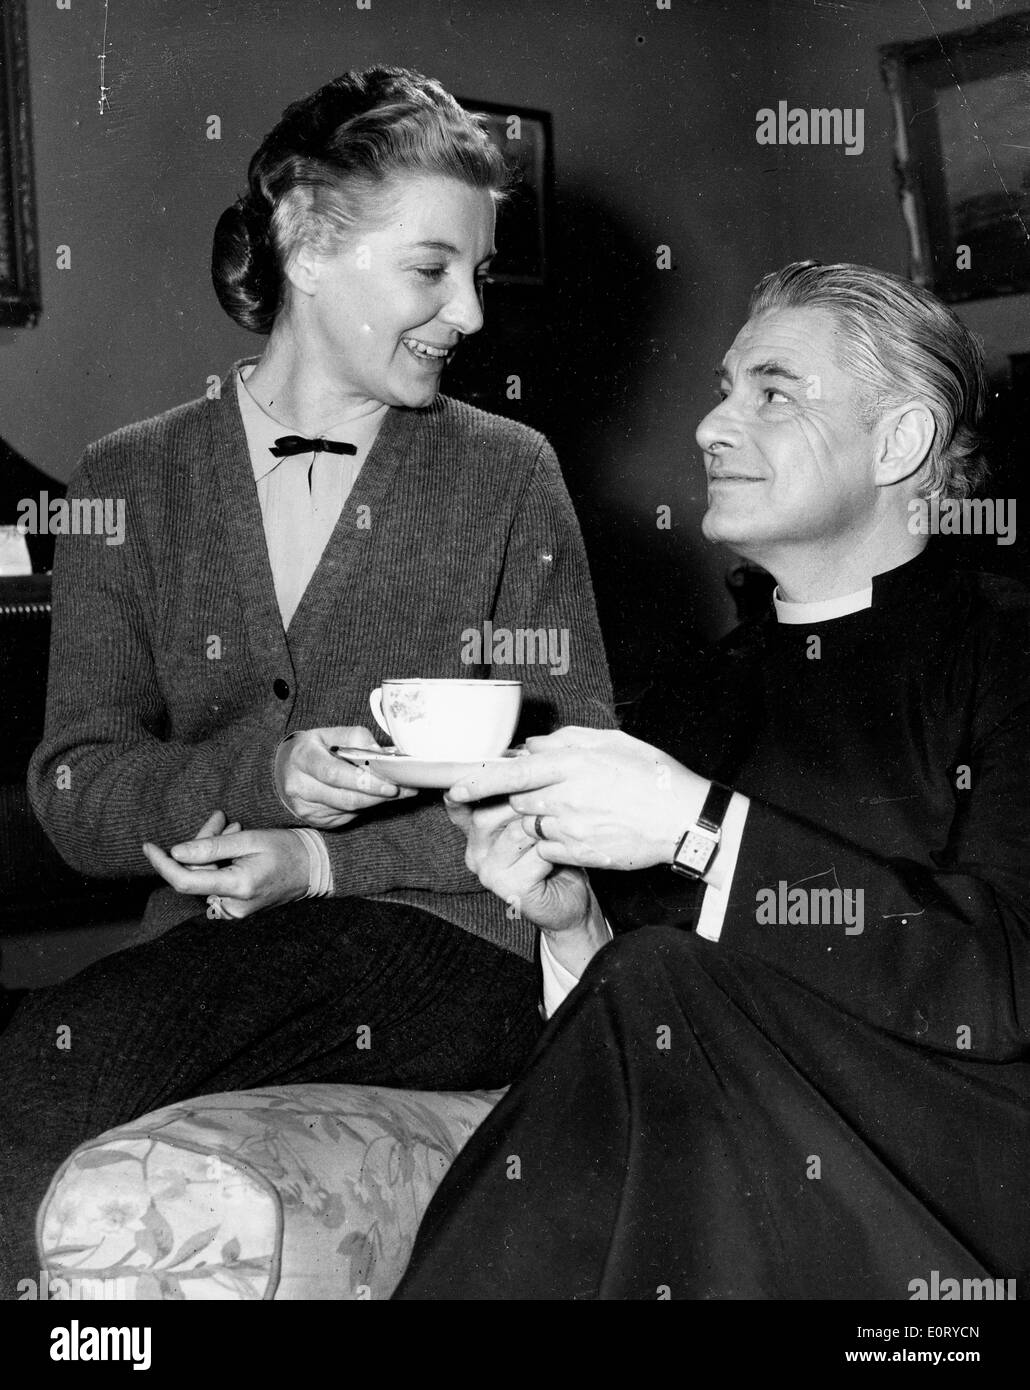 ROBERT DONAT, dressed as the Rev. William Thorne in the 1954 film 'Lease of Life', shares a cup of tea with cast member on set. Stock Photo